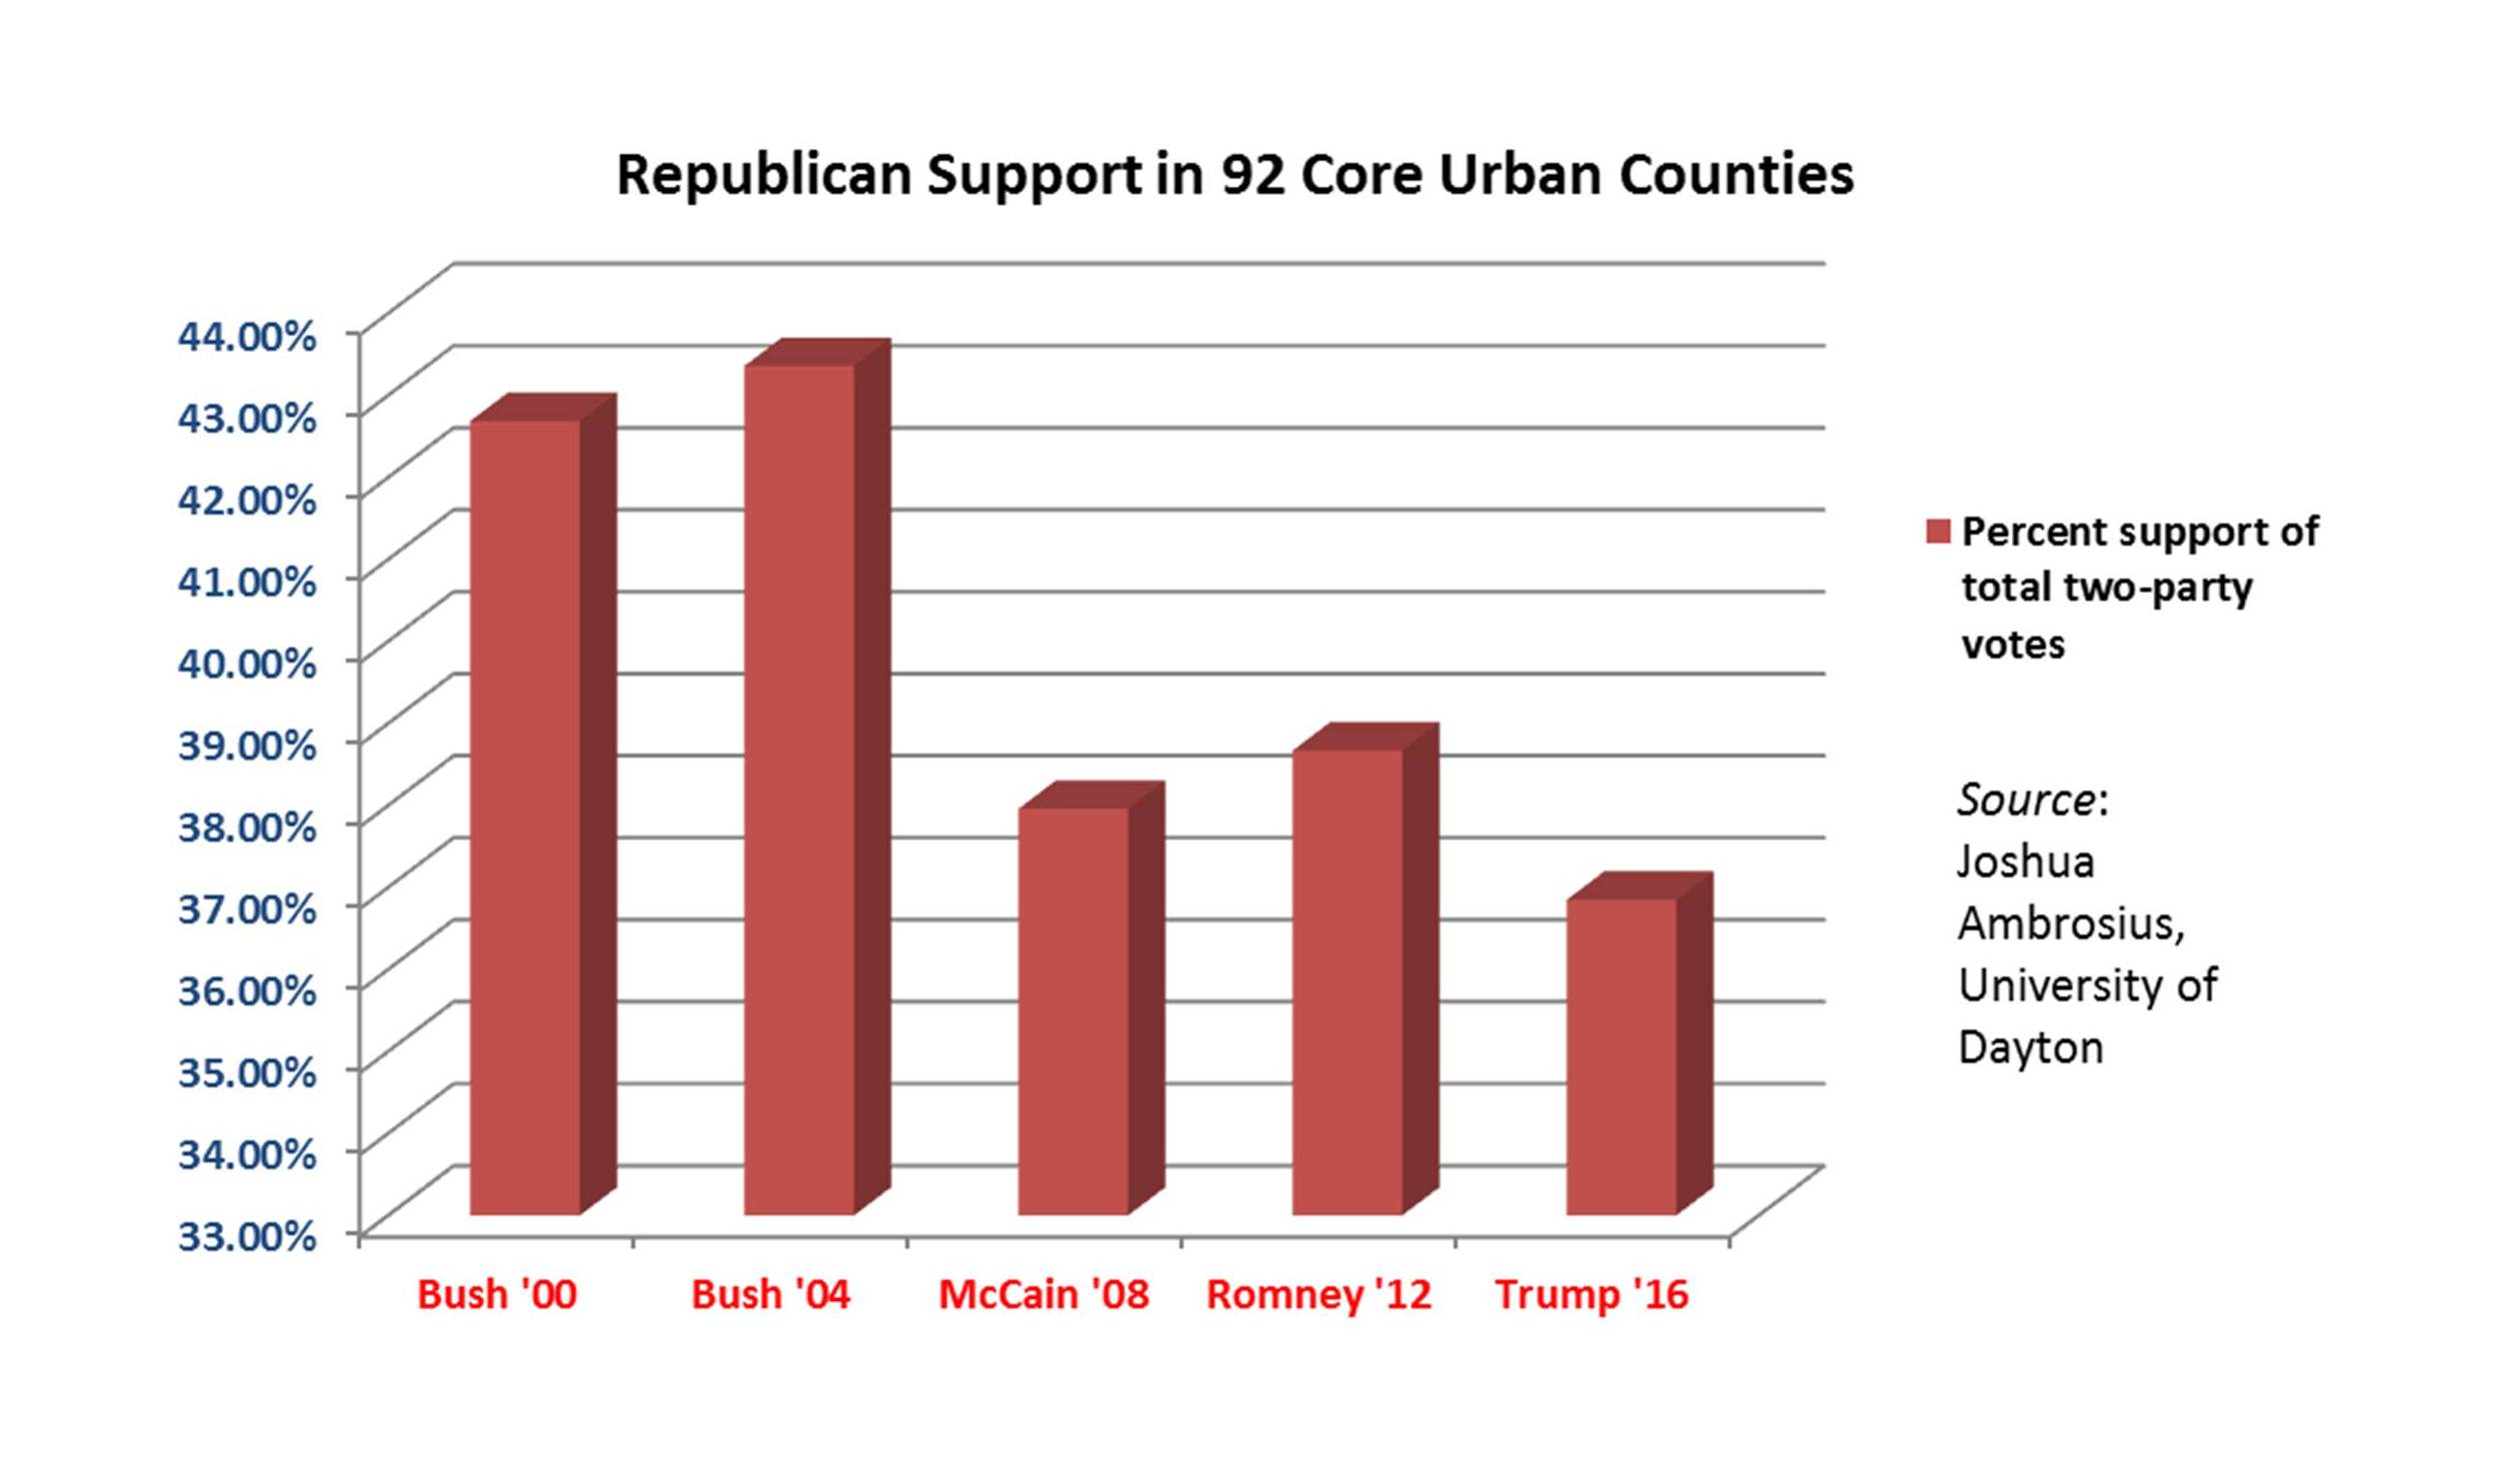 gop-core-county-support-2000-2016%5bambrosius%5d